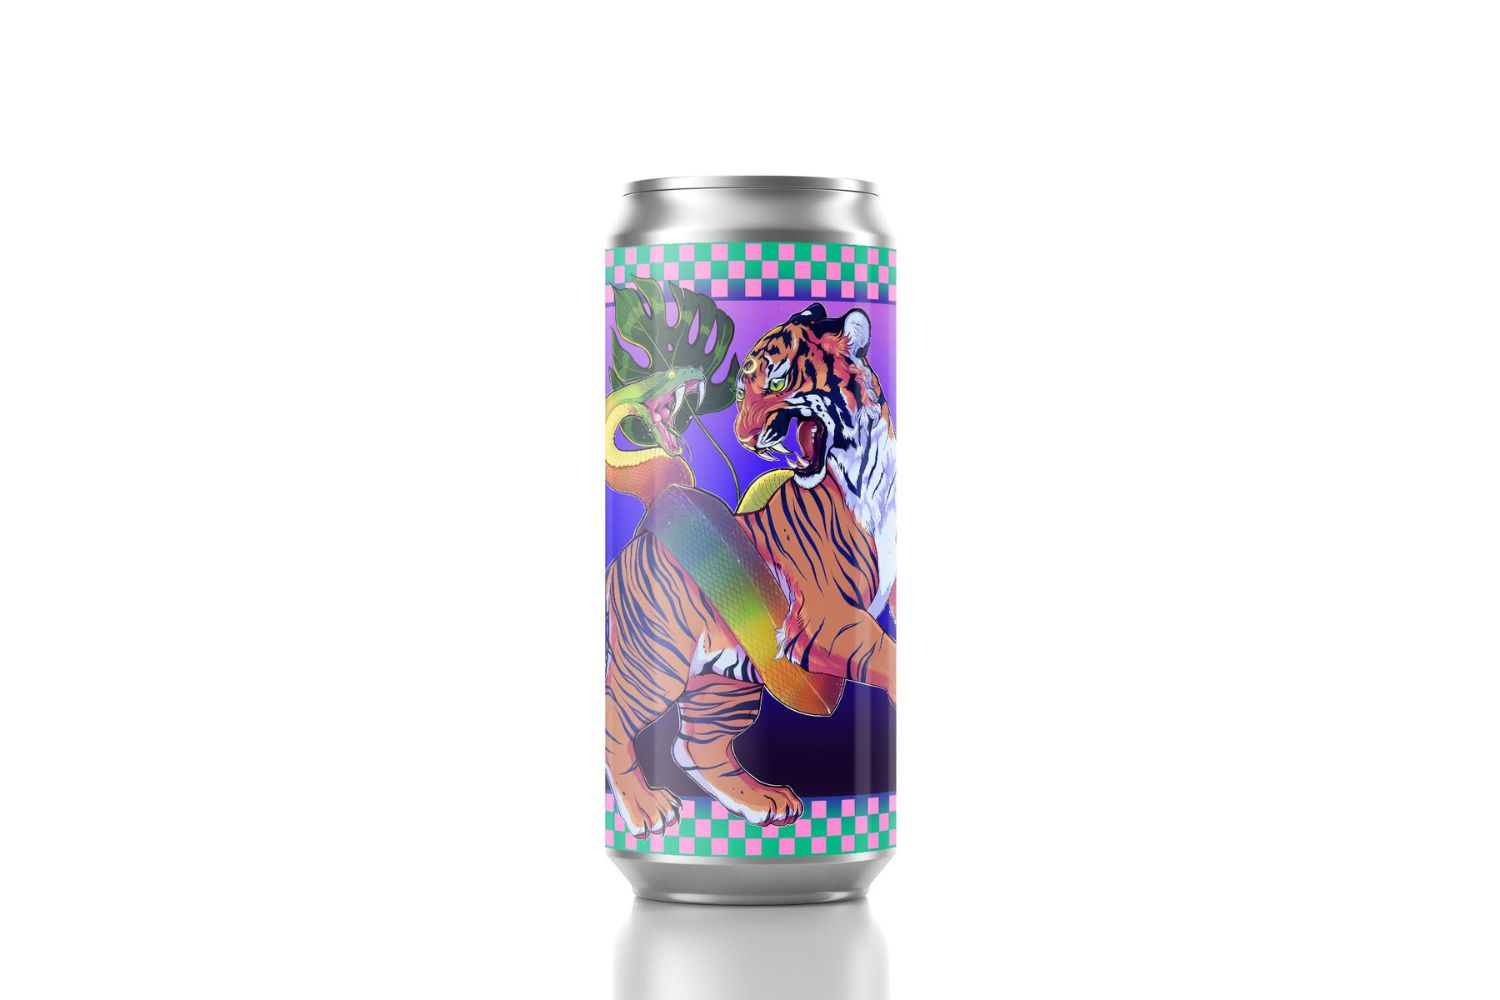 Inspired by Japan, a unique beer in unique cans thumbnail